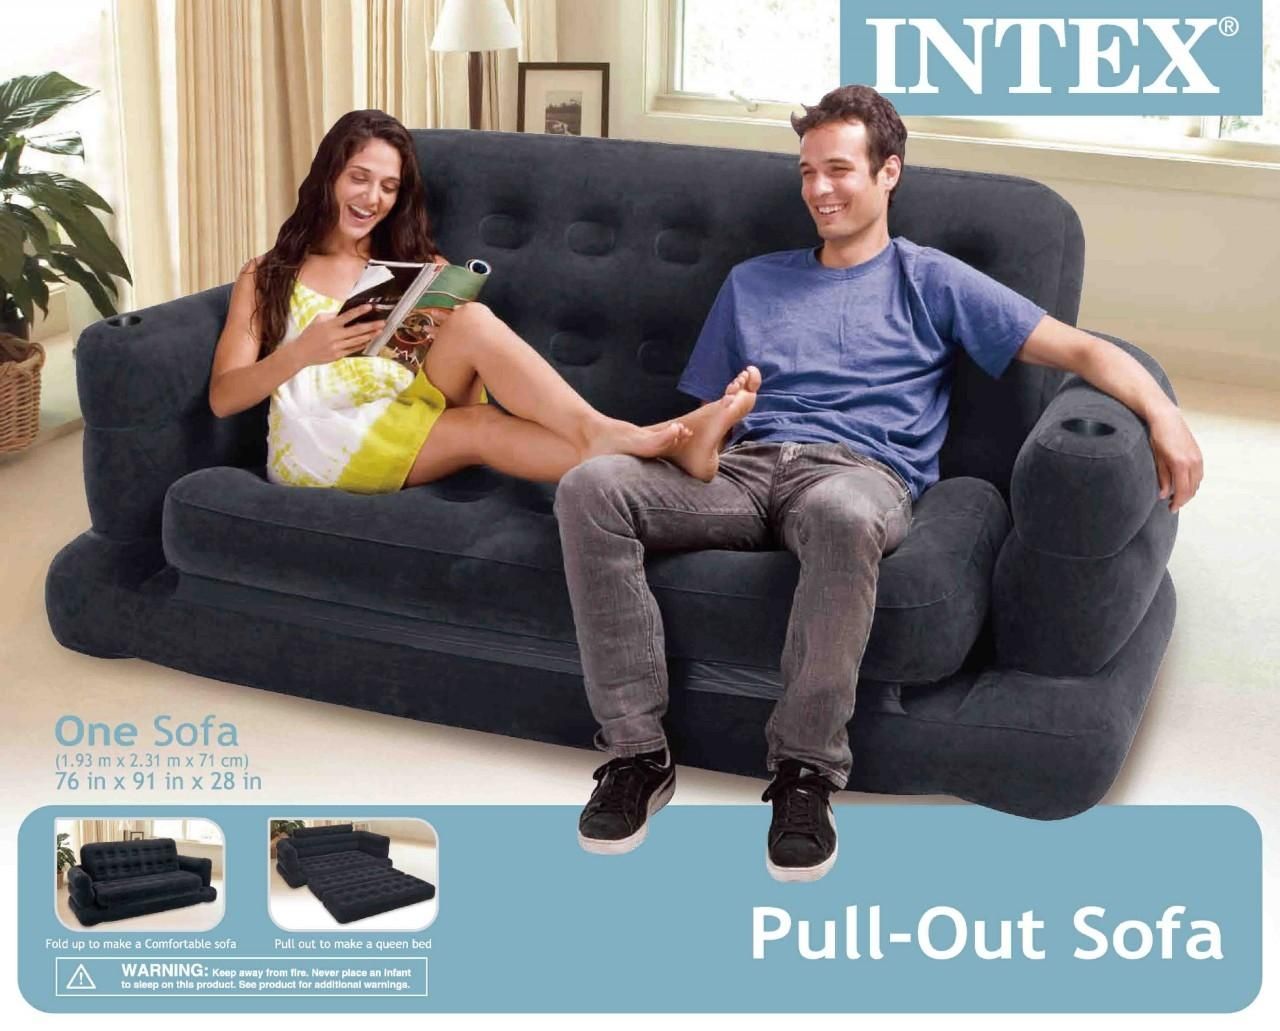 Intex Inflatable Pull Out Sofa And Queen Air Mattress Throughout Intex Inflatable Sofas (View 5 of 20)